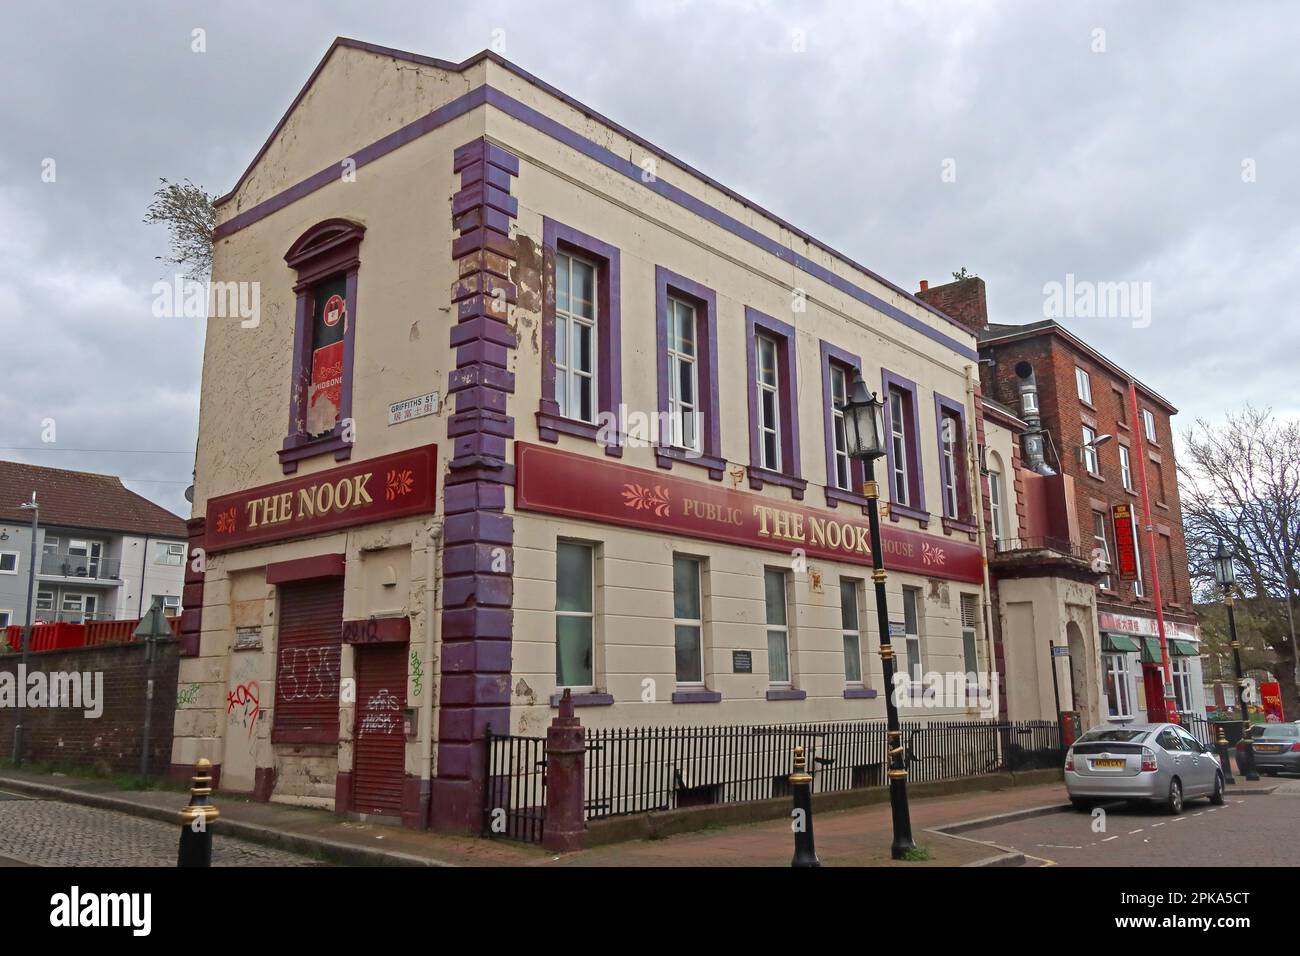 Bozer historique Higsons, The NOOK, Griffiths St, Nelson Street, Liverpool Chinatown pub, Merseyside, Angleterre, ROYAUME-UNI, L1 5DW Banque D'Images